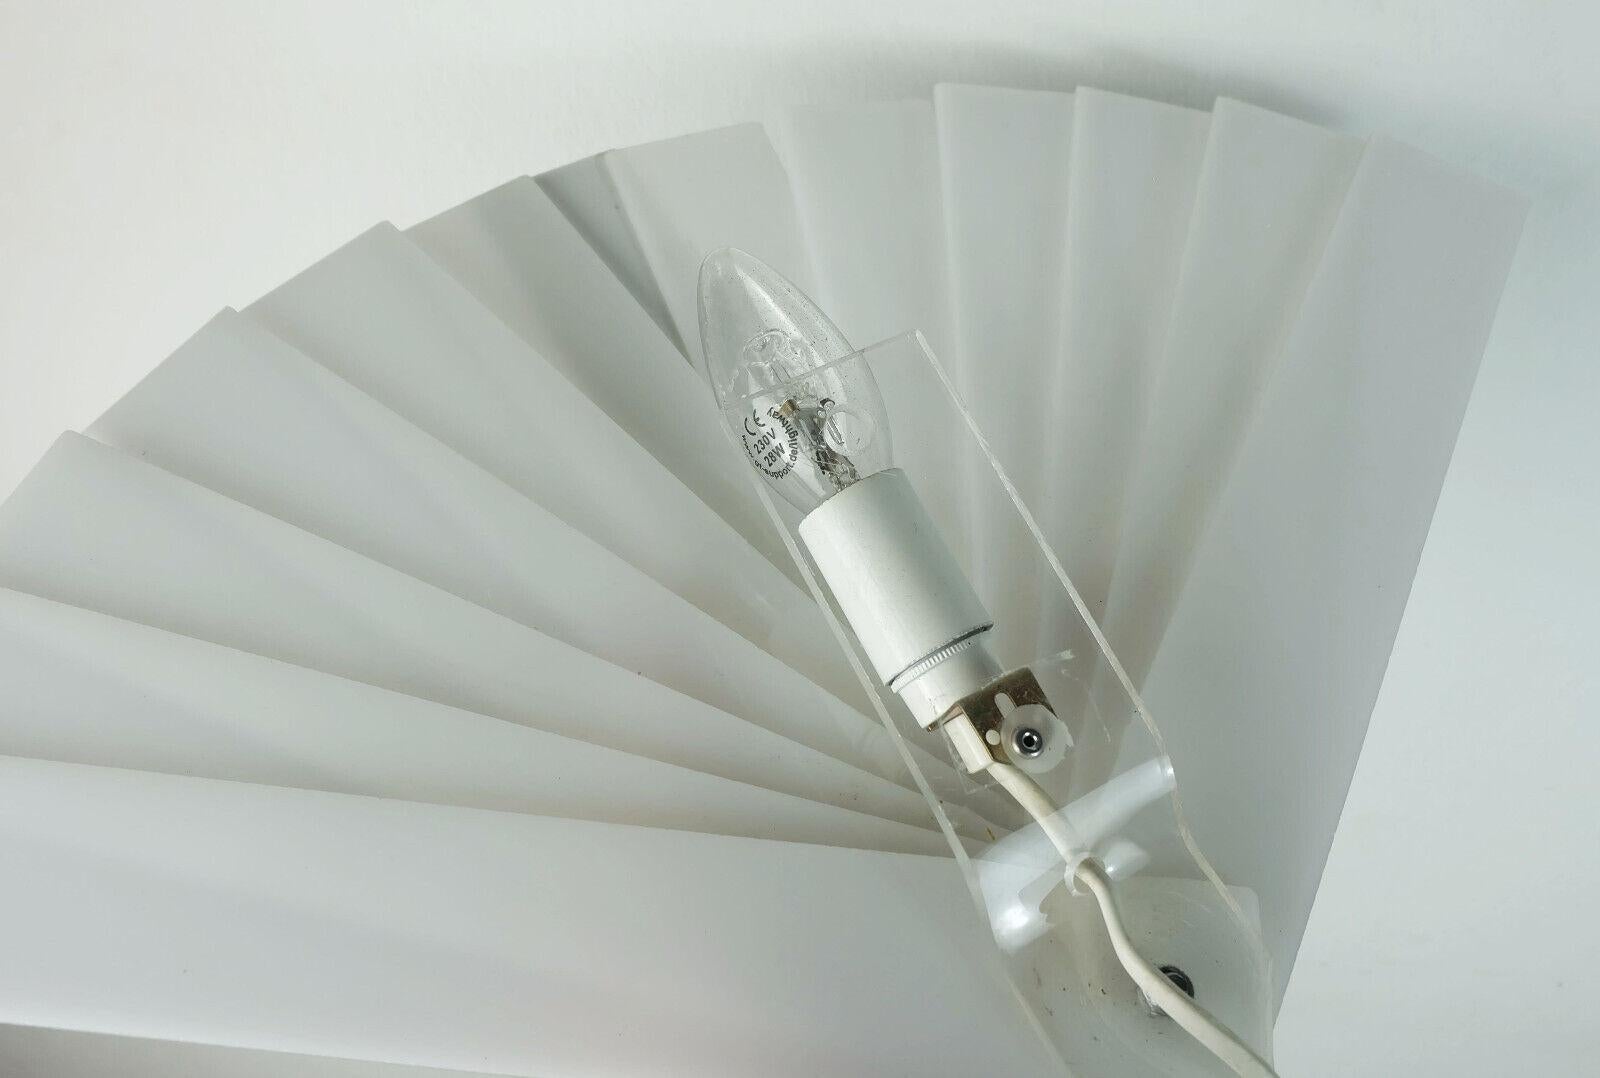 1980s fan-shaped sconce made of slightly flexible white acrylic. For direct connection to the wall without a switch. Holds one E14 bulb.

Dimensions in cm:
Width 49 cm, height 30 cm, depth 6 cm.

Dimensions in inches:
Width 19.29